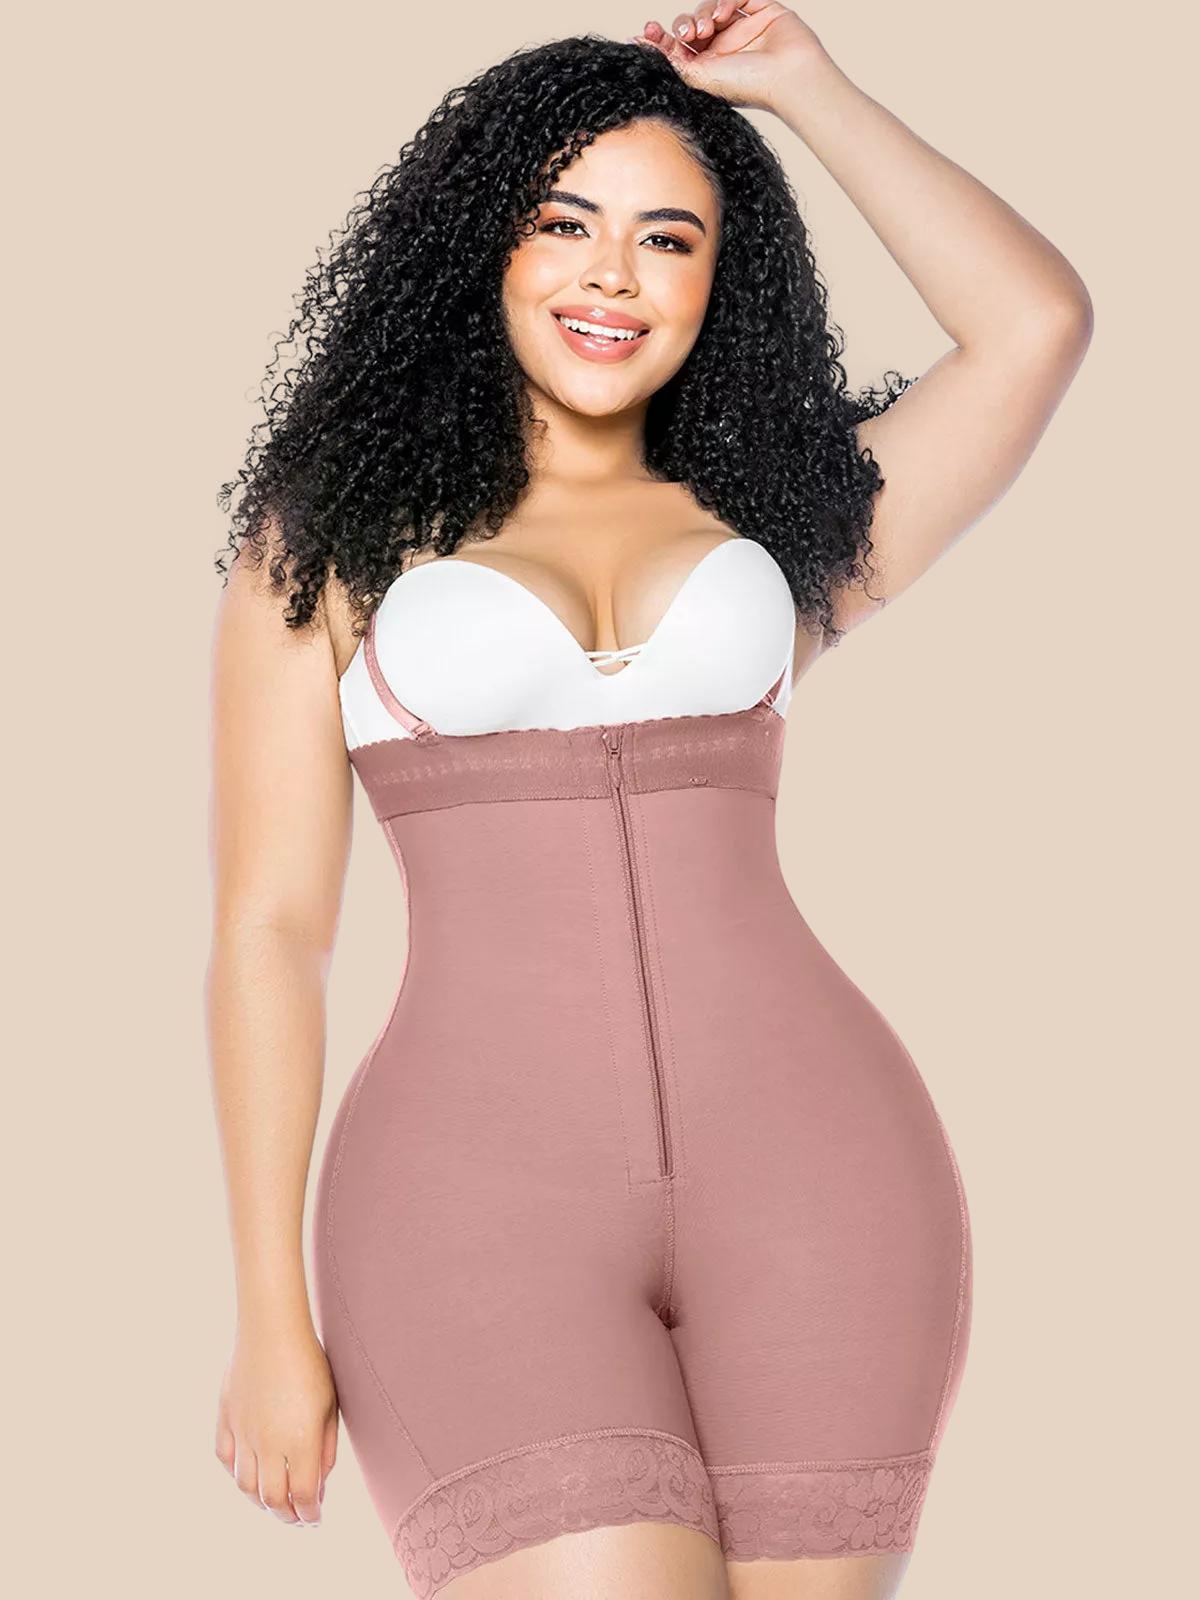 ChicCurve Women's High-Waisted Butt Lifter Shapewear LL7 Rosy